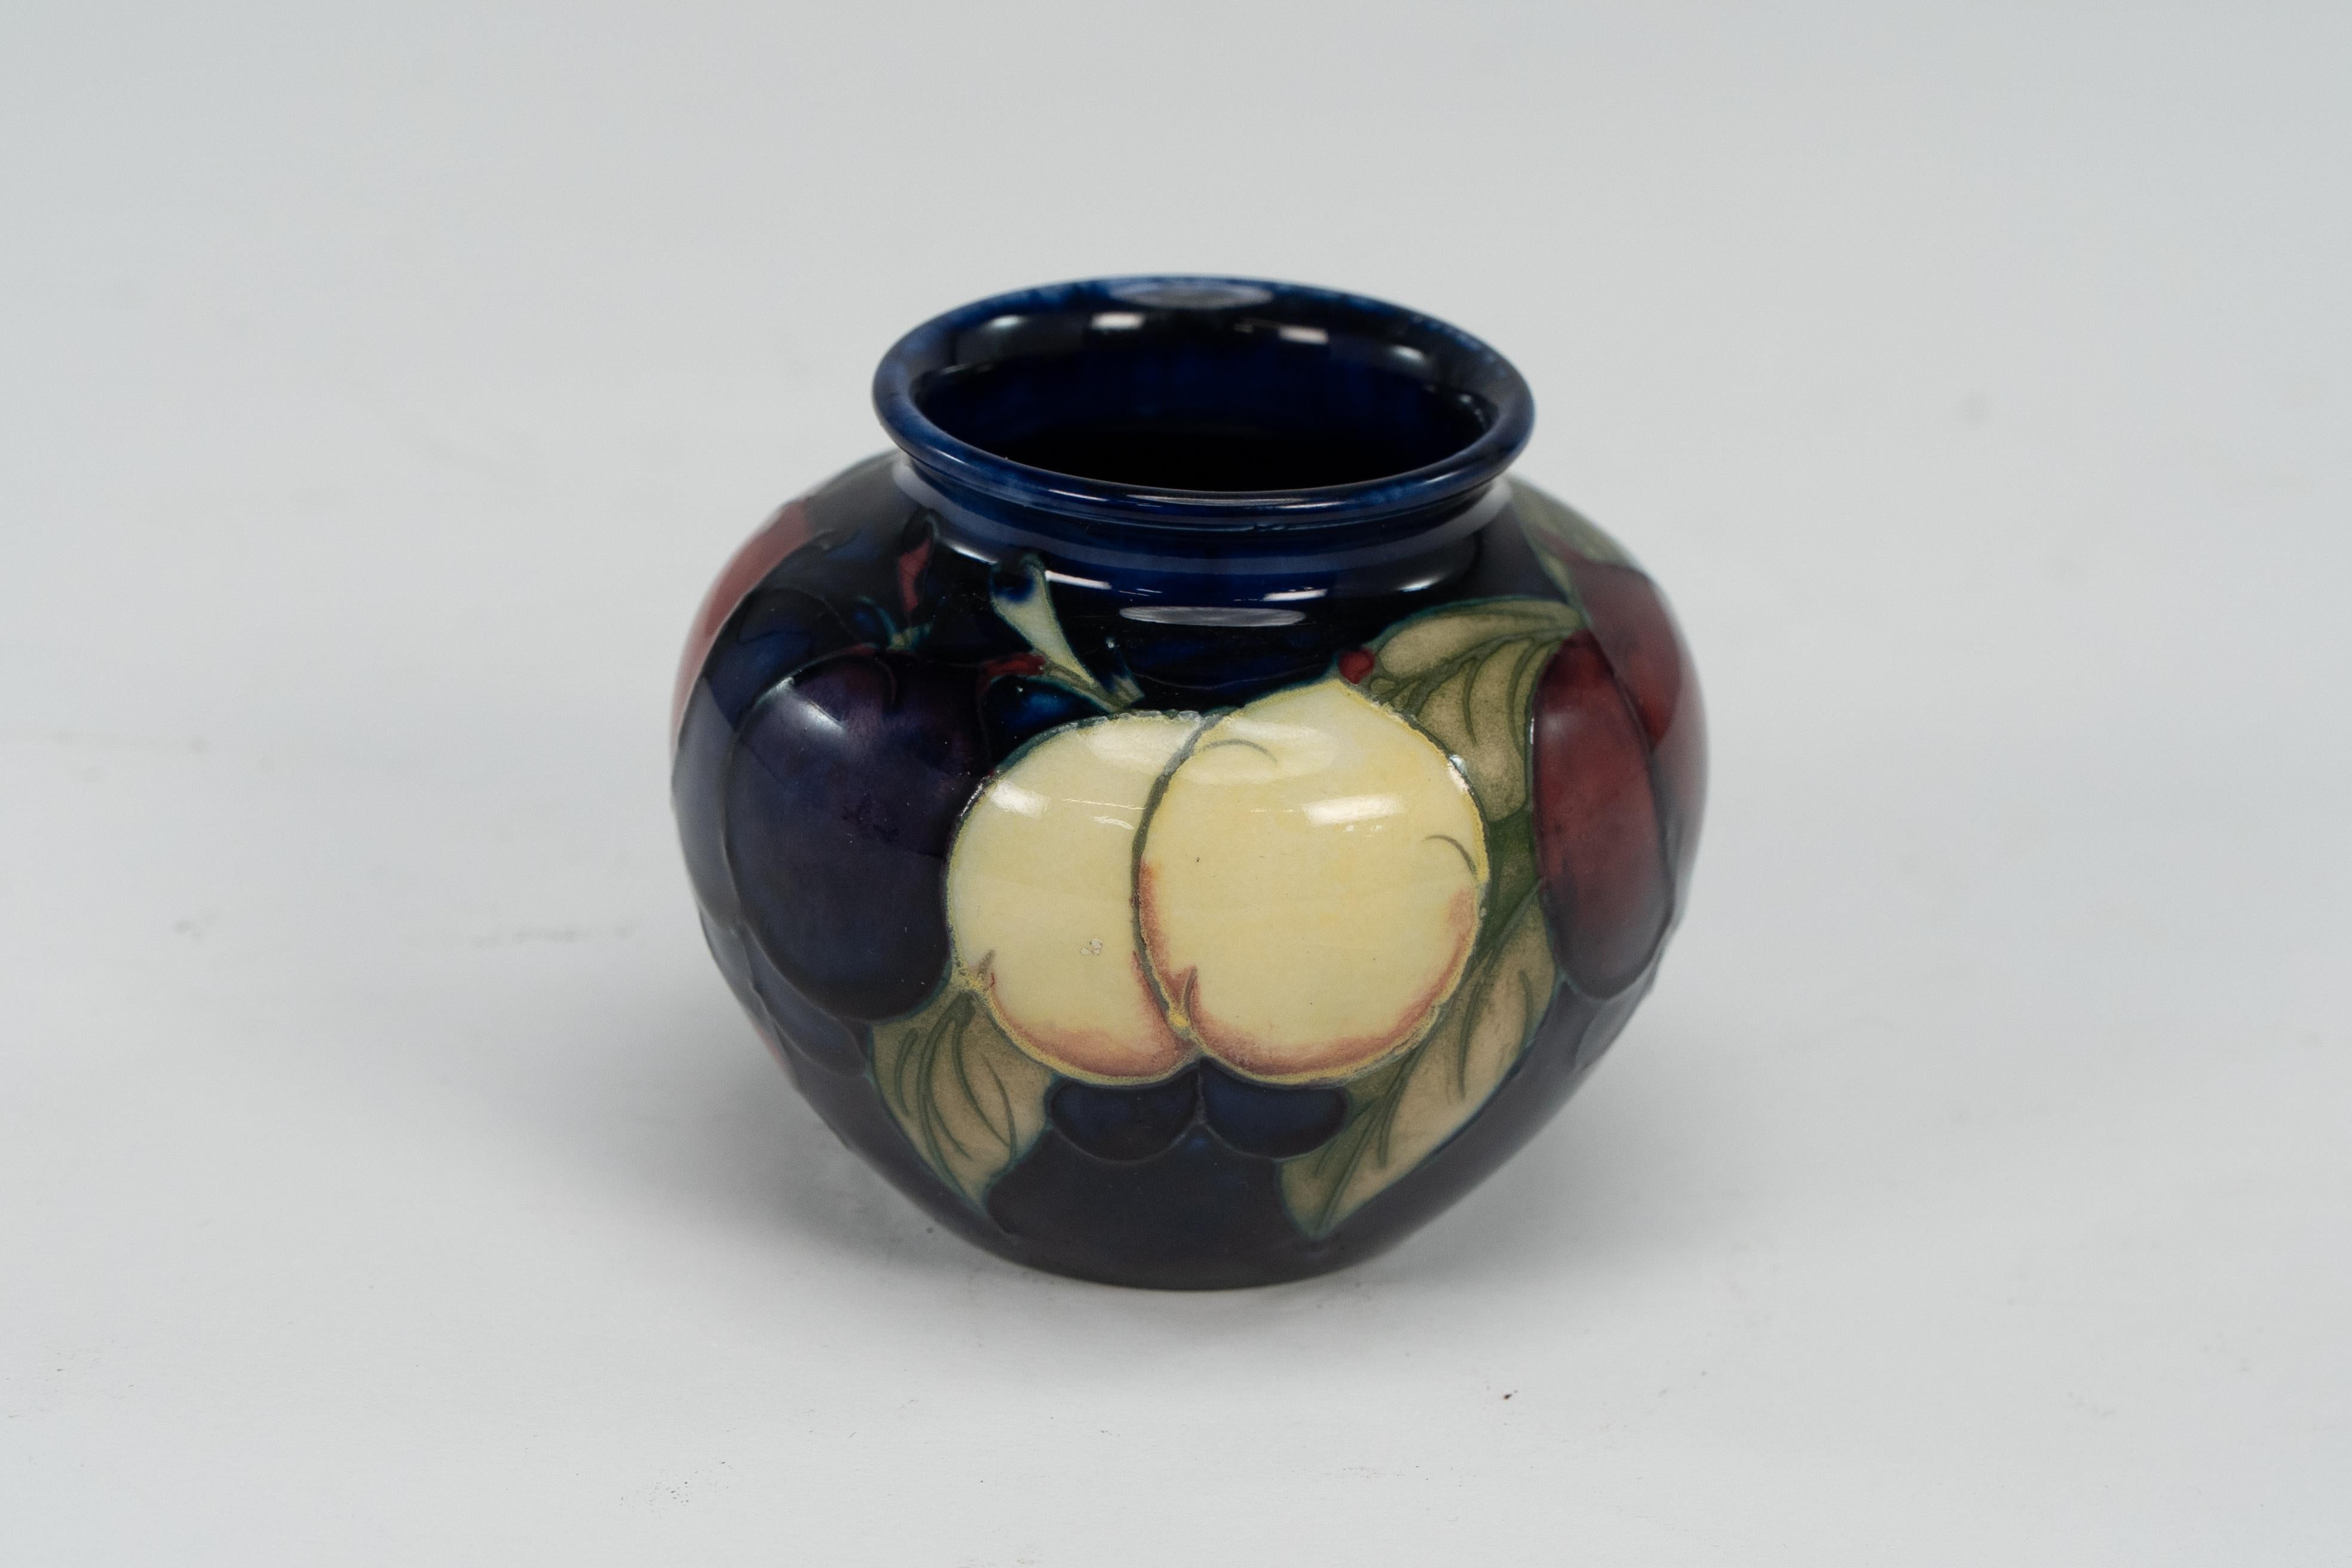 William Moorcroft. A sweet little colorful Leaf and Berry vase in wonderful original condition.